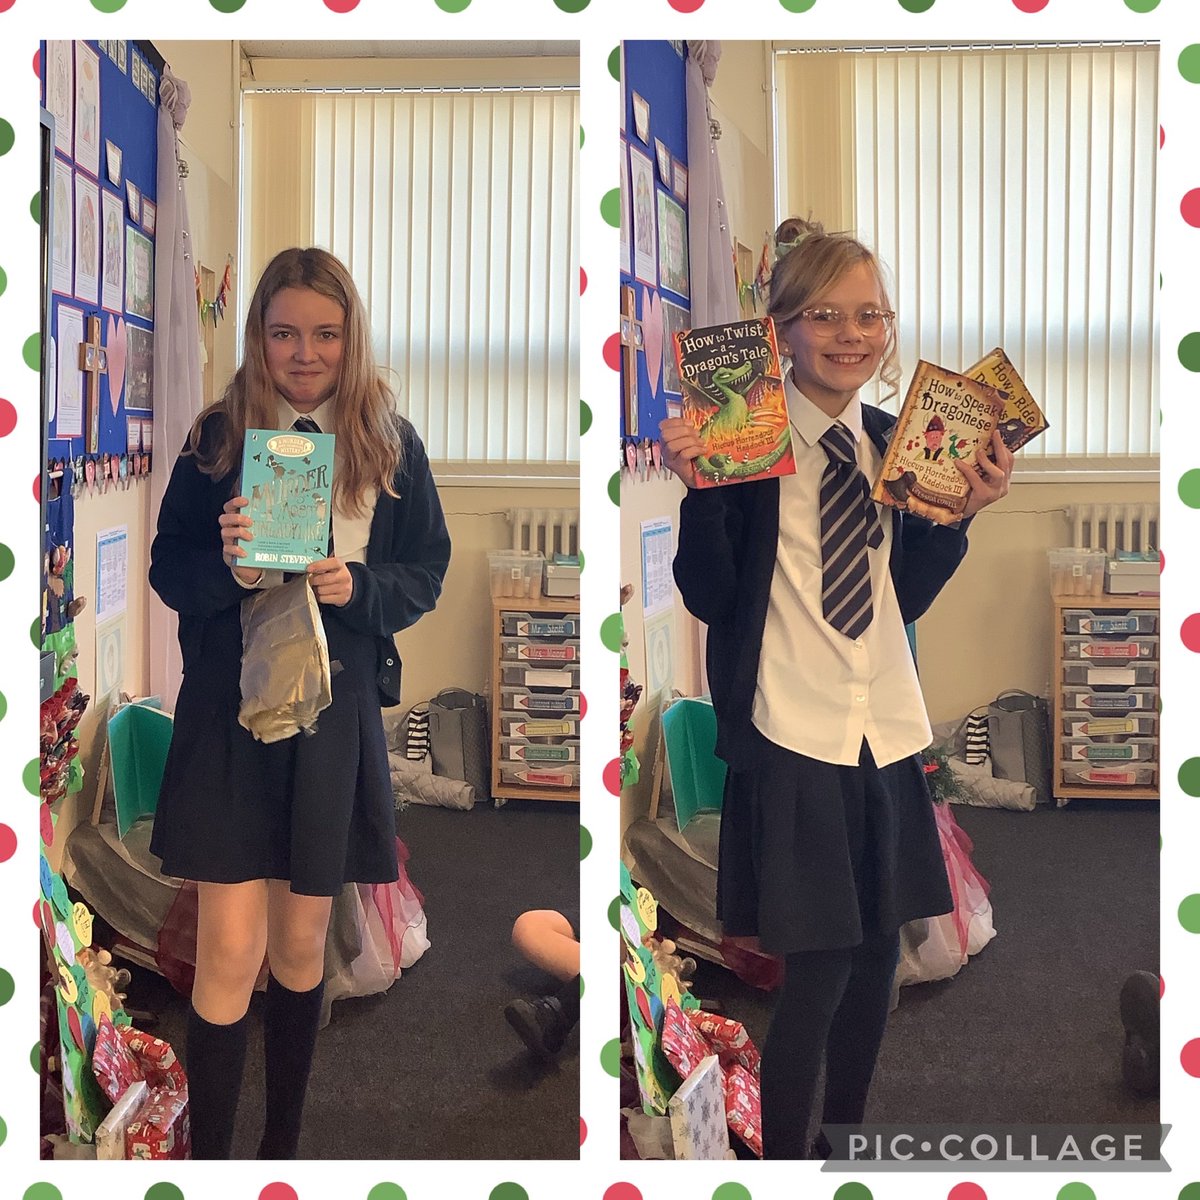 Some more brilliant books for Bookvent in 6RB! @ololprimary_HT #EnglishOLOL #MakeADifference